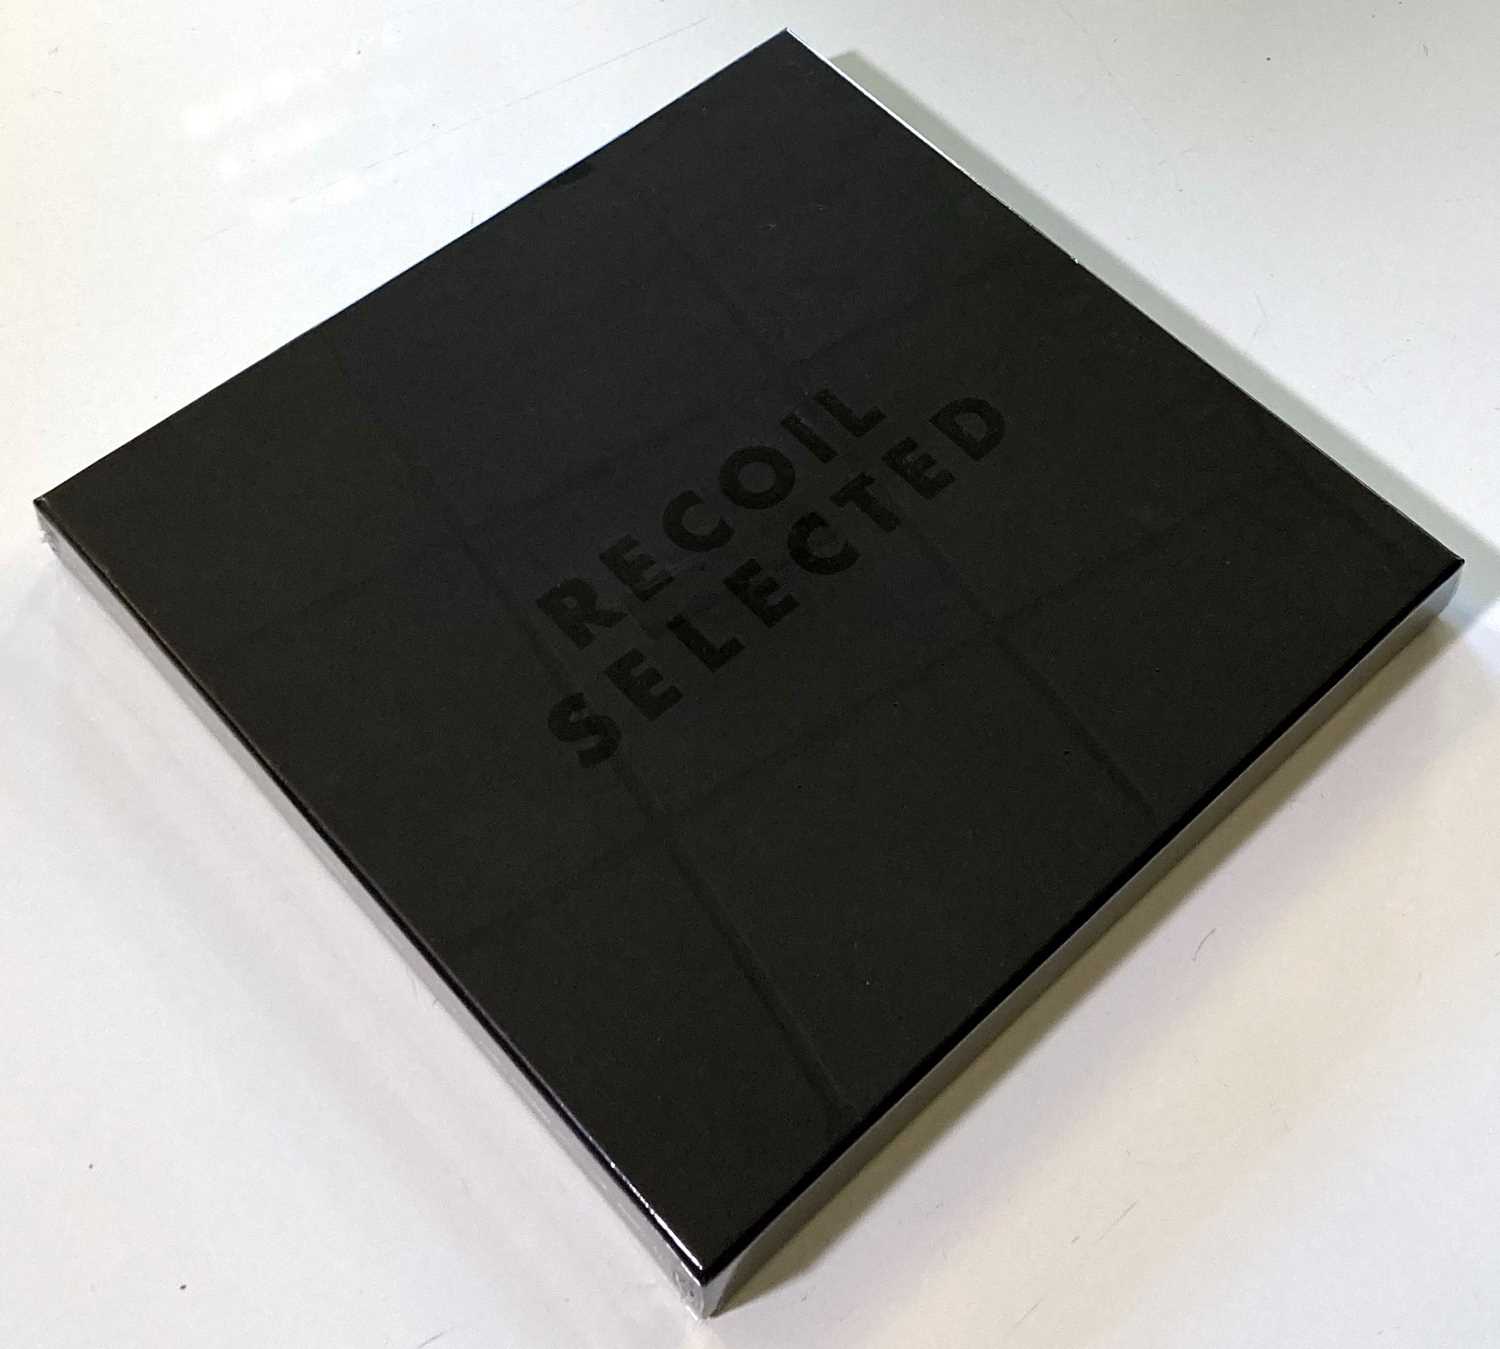 Lot 72 - ALAN WILDER / RECOIL - SEALED COPY OF SIGNED DELUXE RECOIL SELECTED BOX.